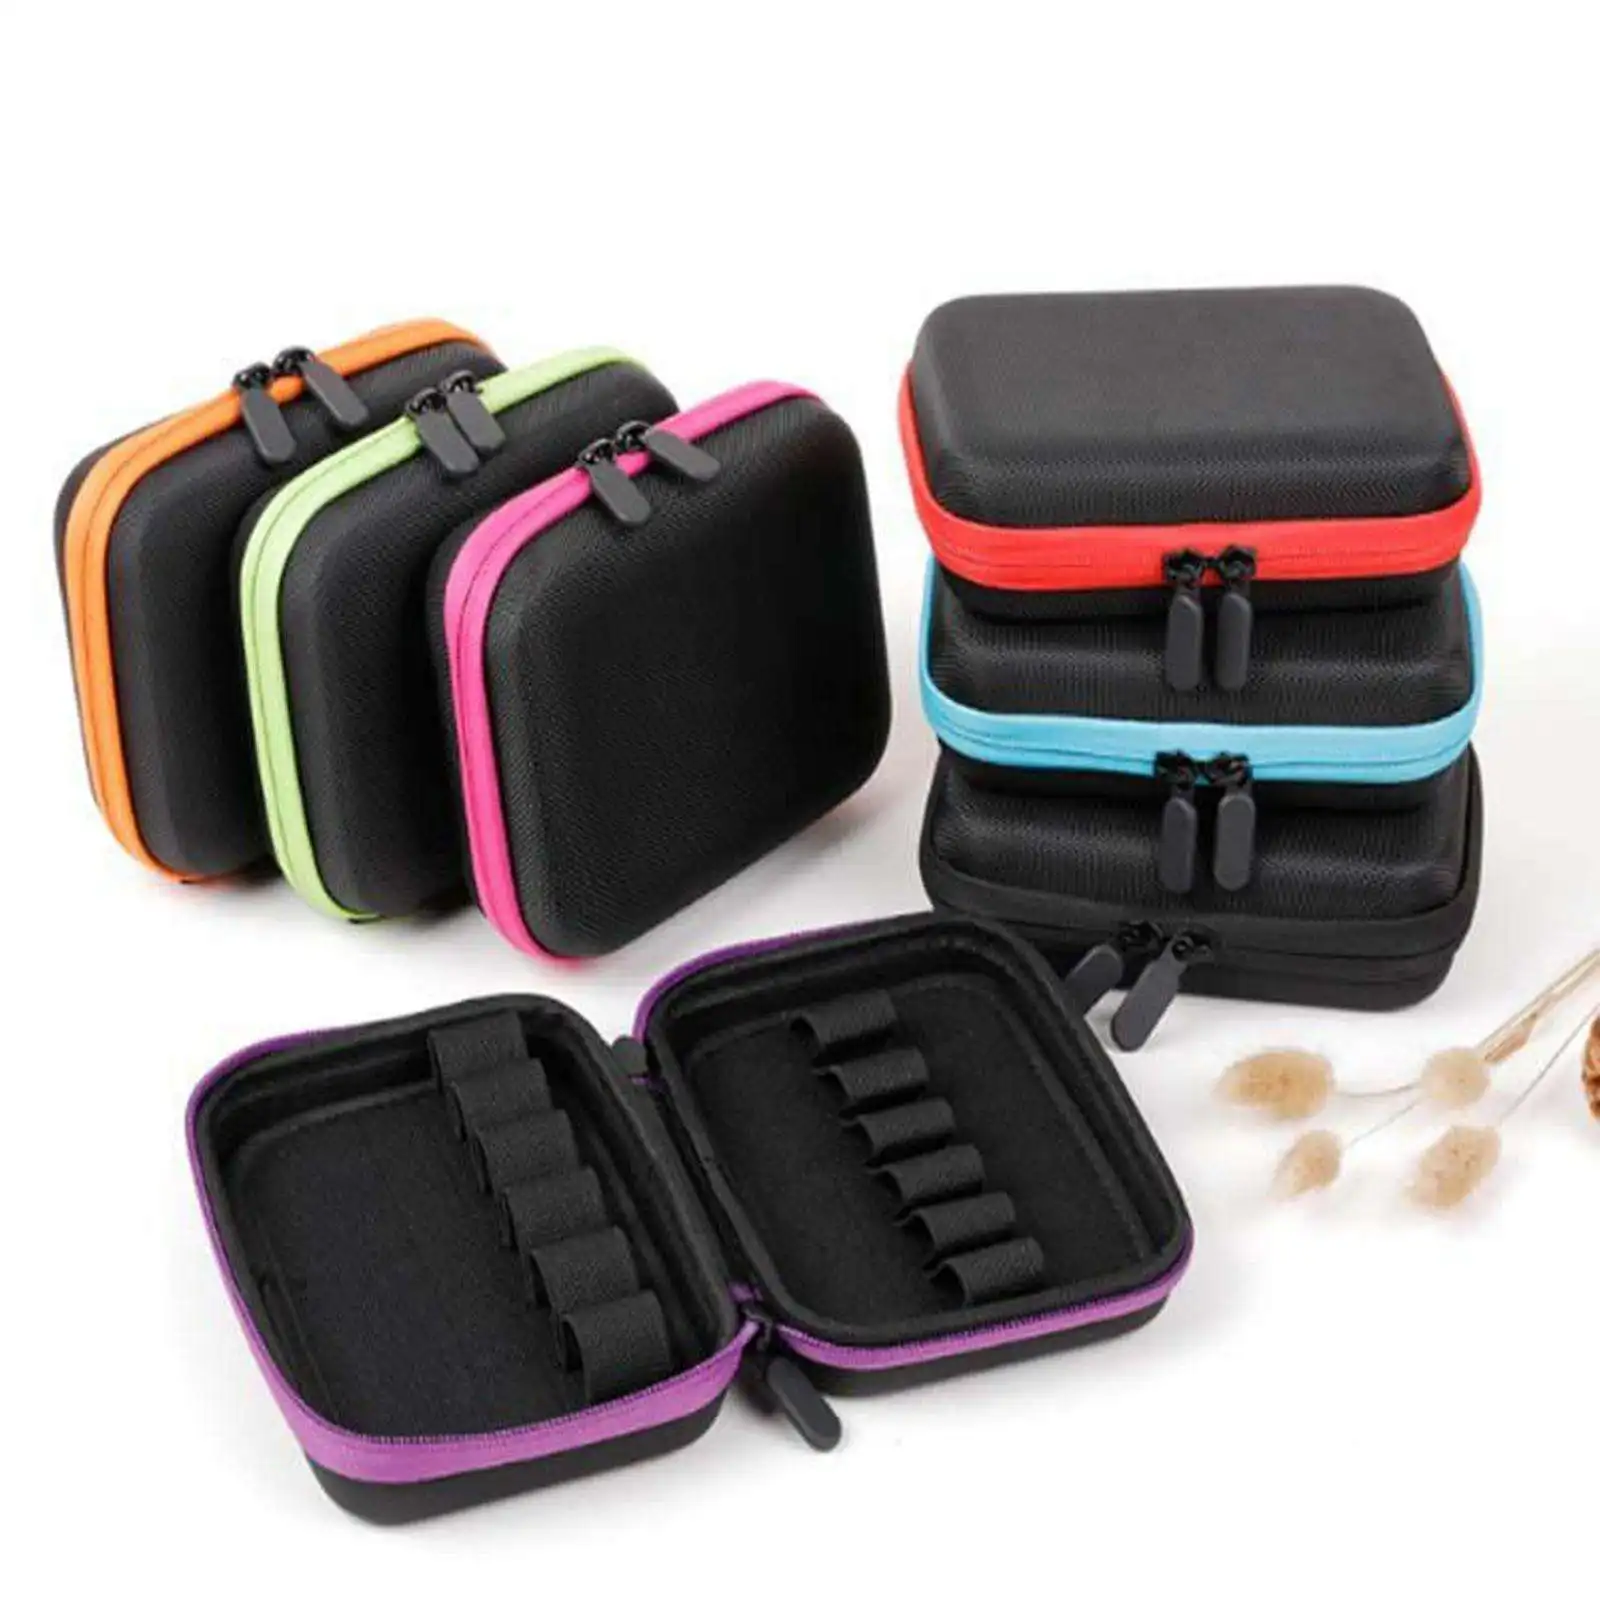 12 Bottles Essential Oil Holder Traveling Carrying Case Storage Box Holds for 10ml Aromatherapy Bottles